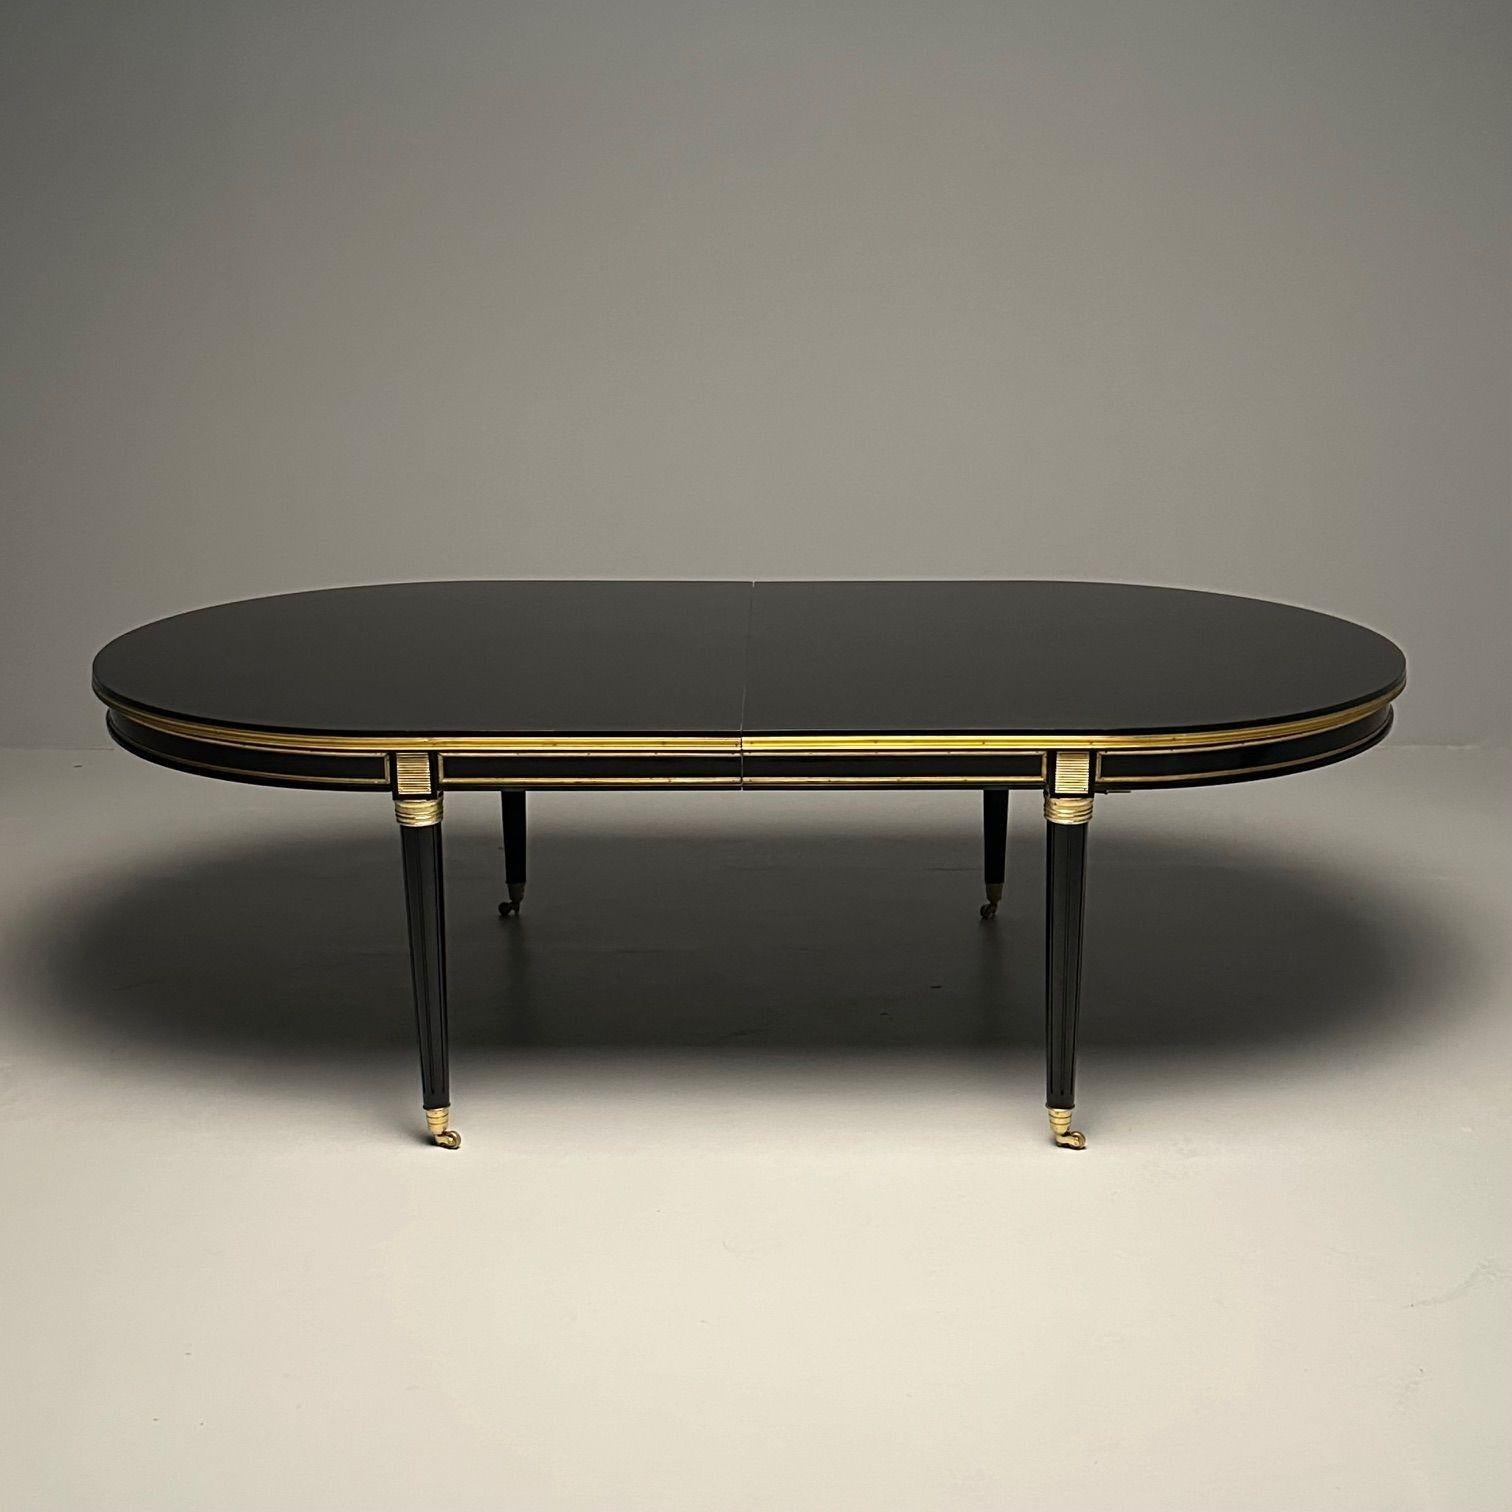 Monumental Louis XVI Hollywood Regency Dining Table, 15 Feet, Bronze Mounted, Maison Jansen Style

Simply Impressive is this larger than life fifteen foot long by 52 inch wide ebonized dining table in the fashion of Maison Jansen. A finely bronze